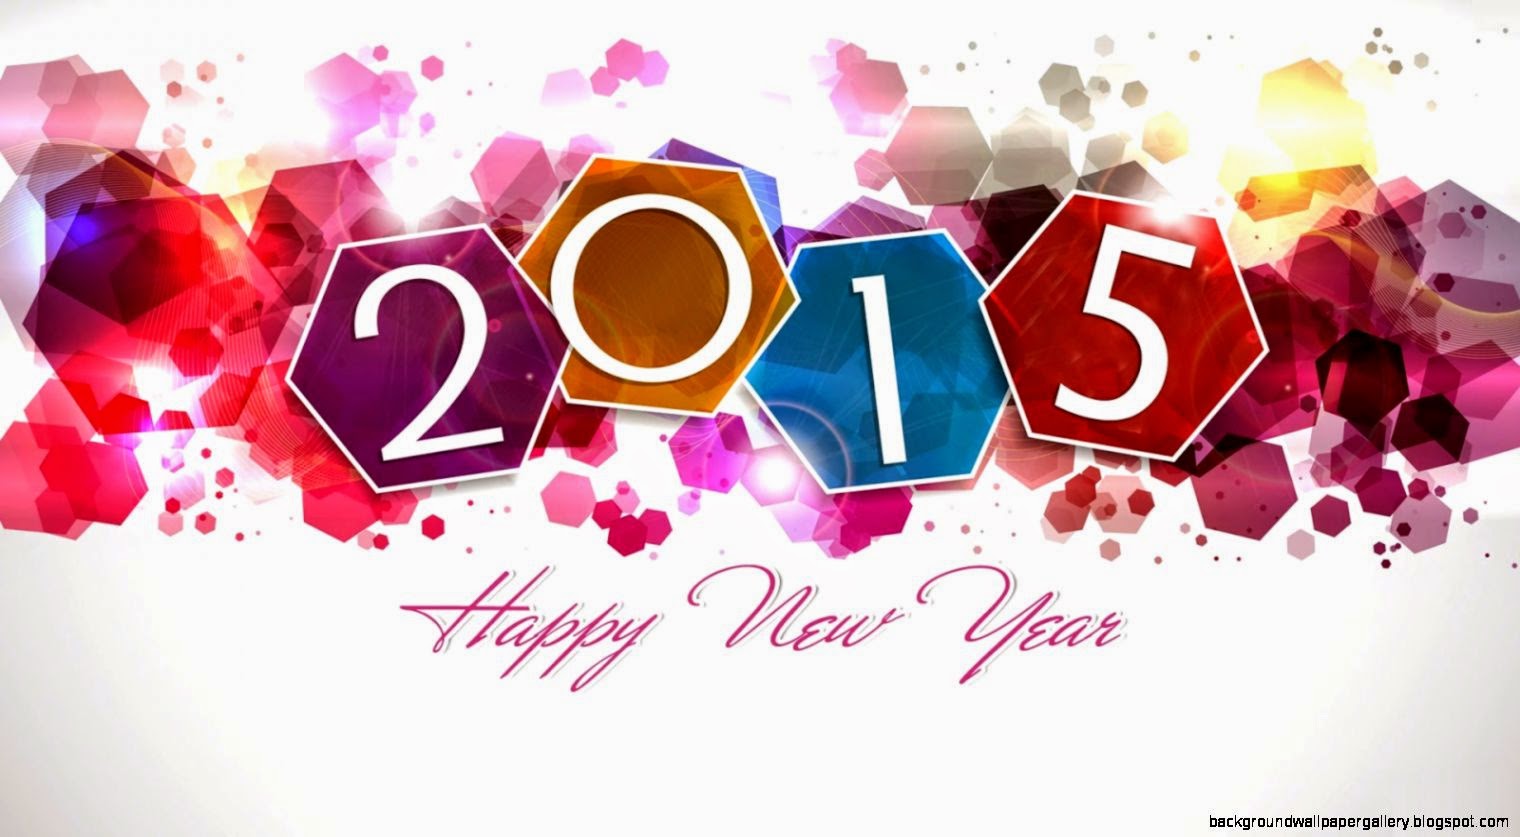 Design Happy New Year Colorful Wallpaper